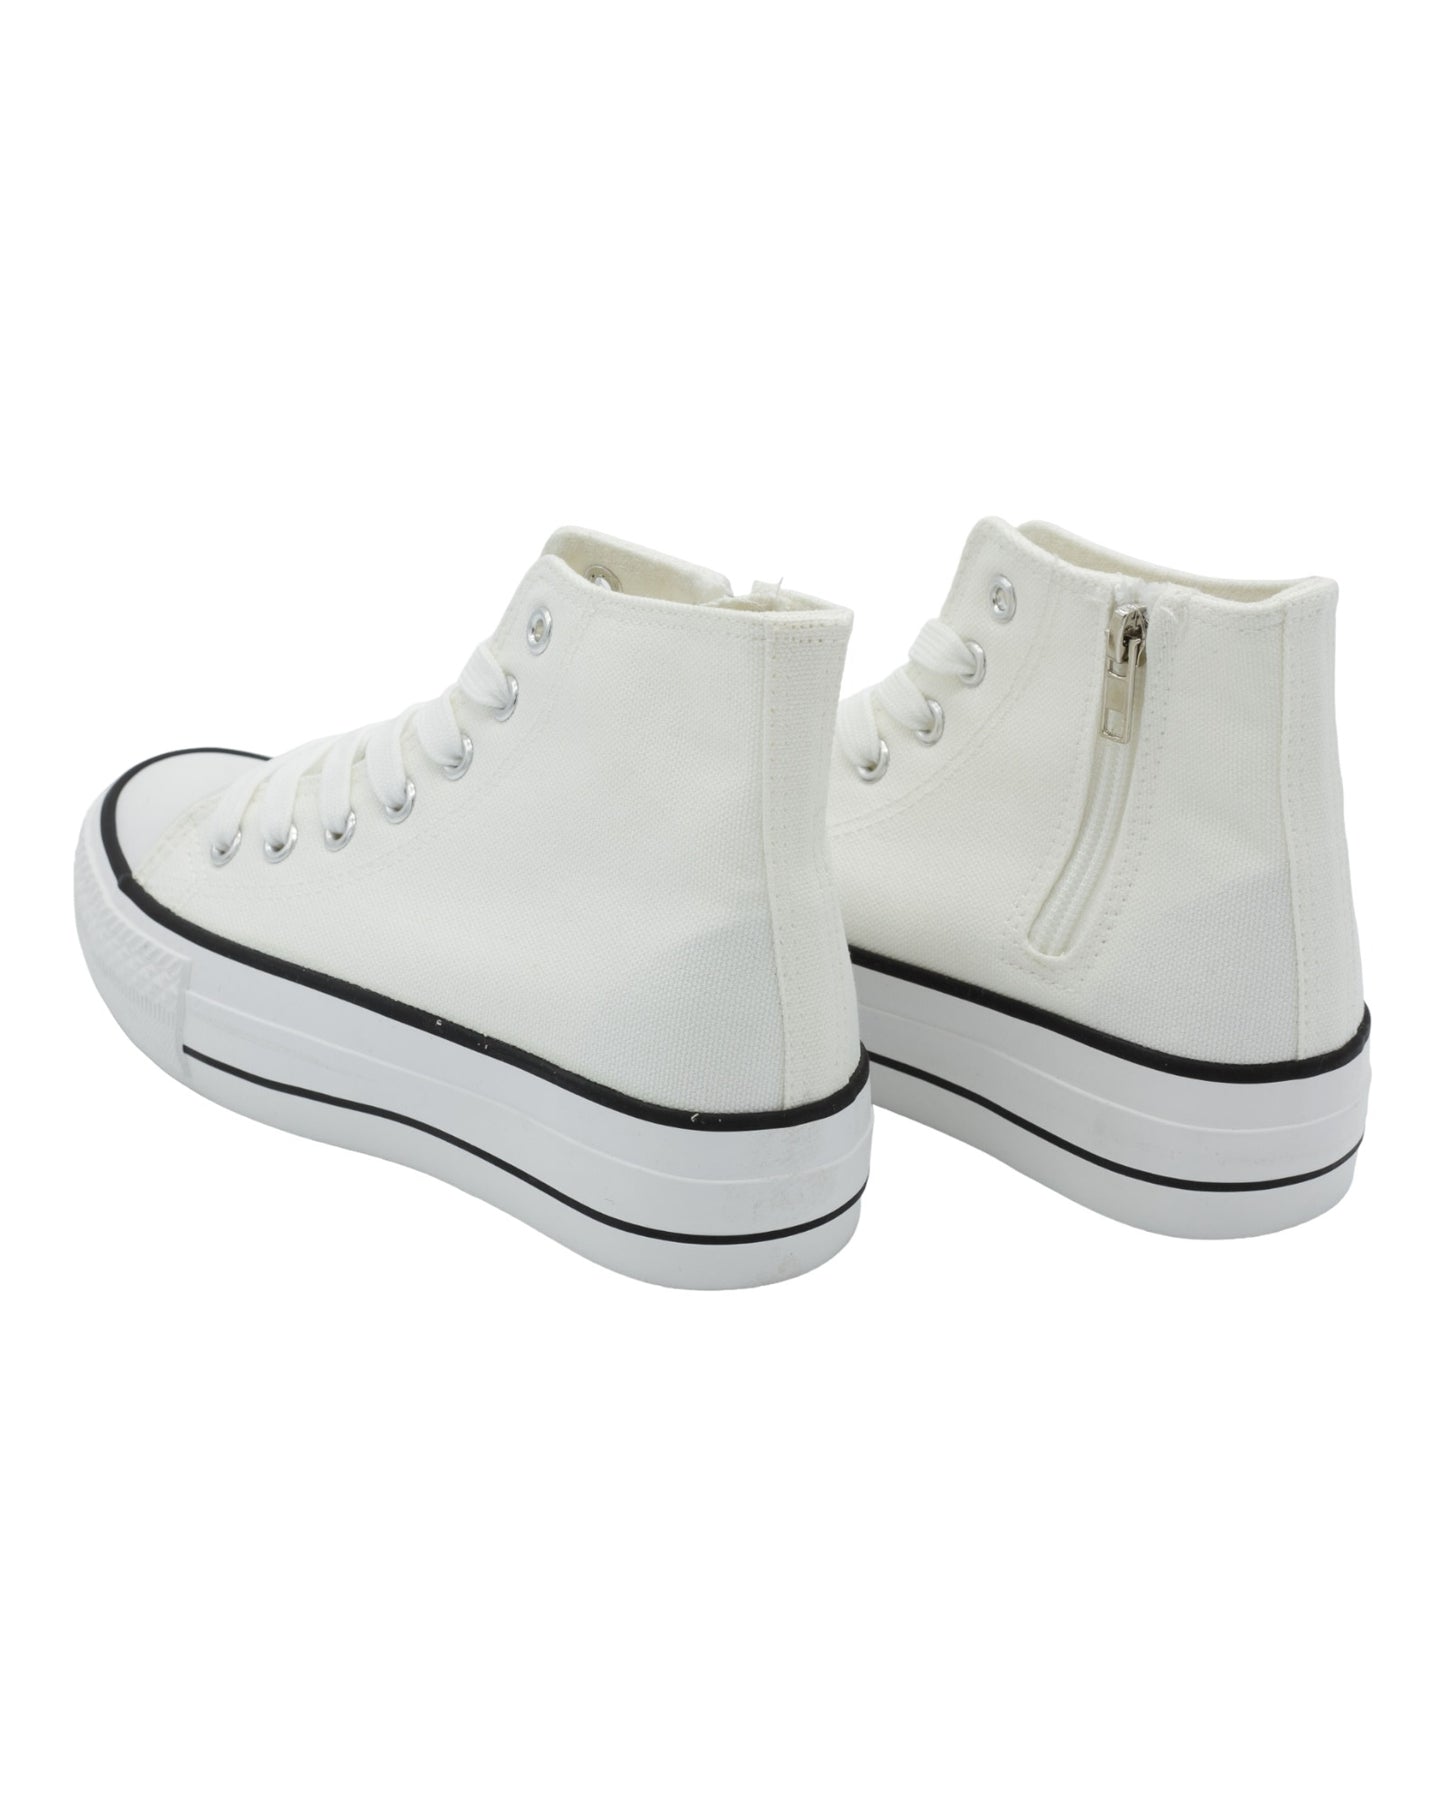 WOMEN'S ANKLE BOOTS STAY 12-2065 IN WHITE